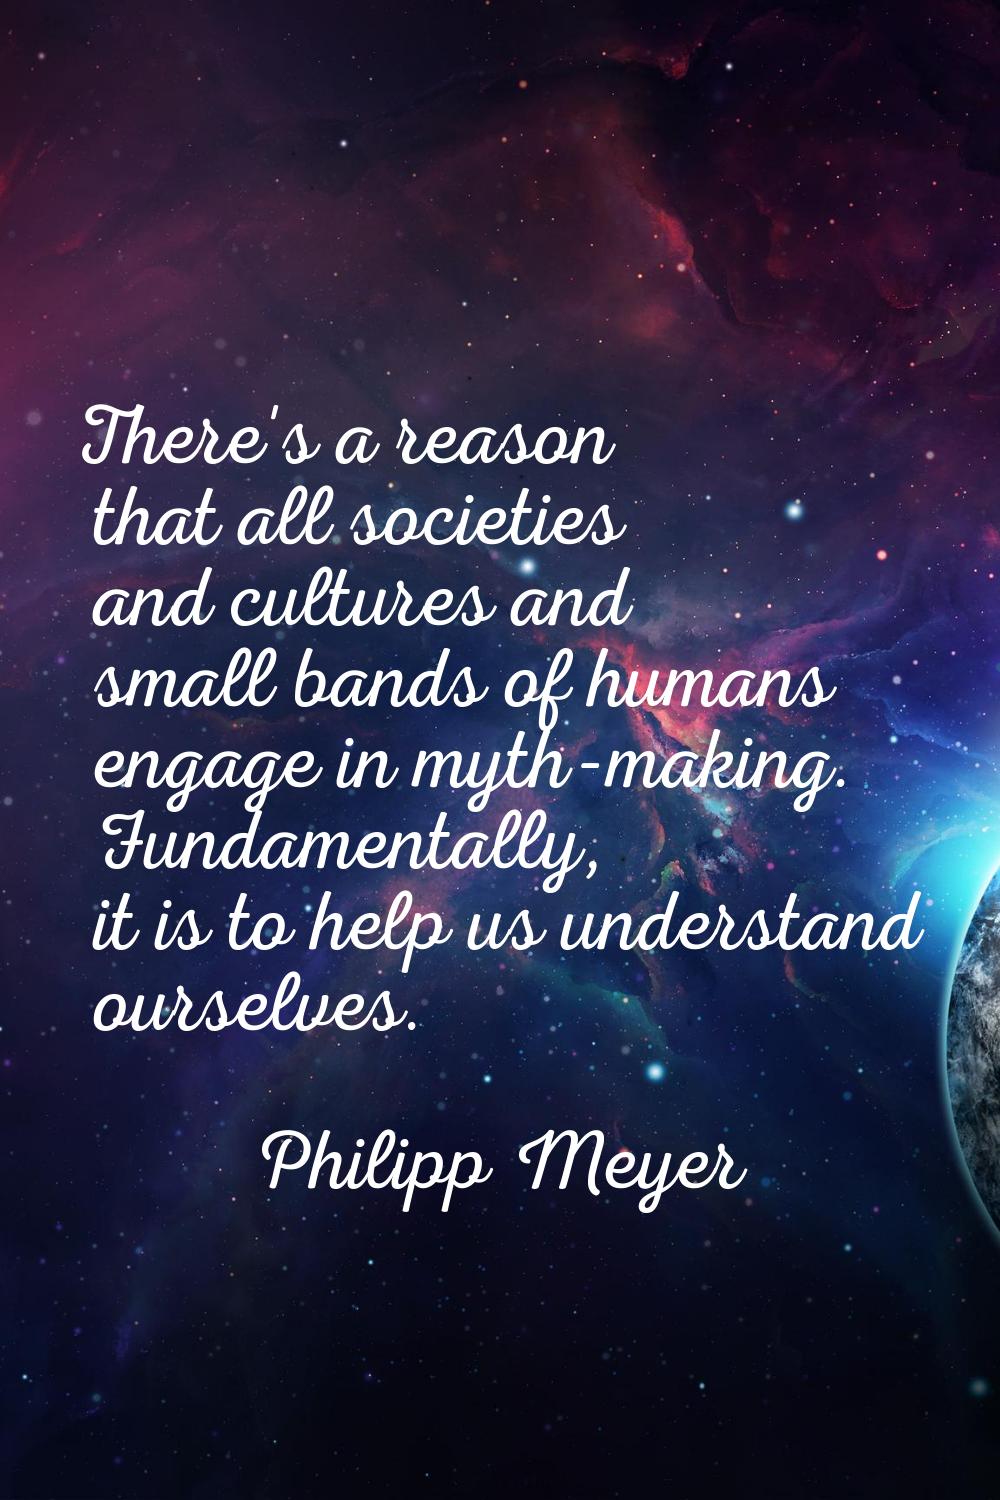 There's a reason that all societies and cultures and small bands of humans engage in myth-making. F